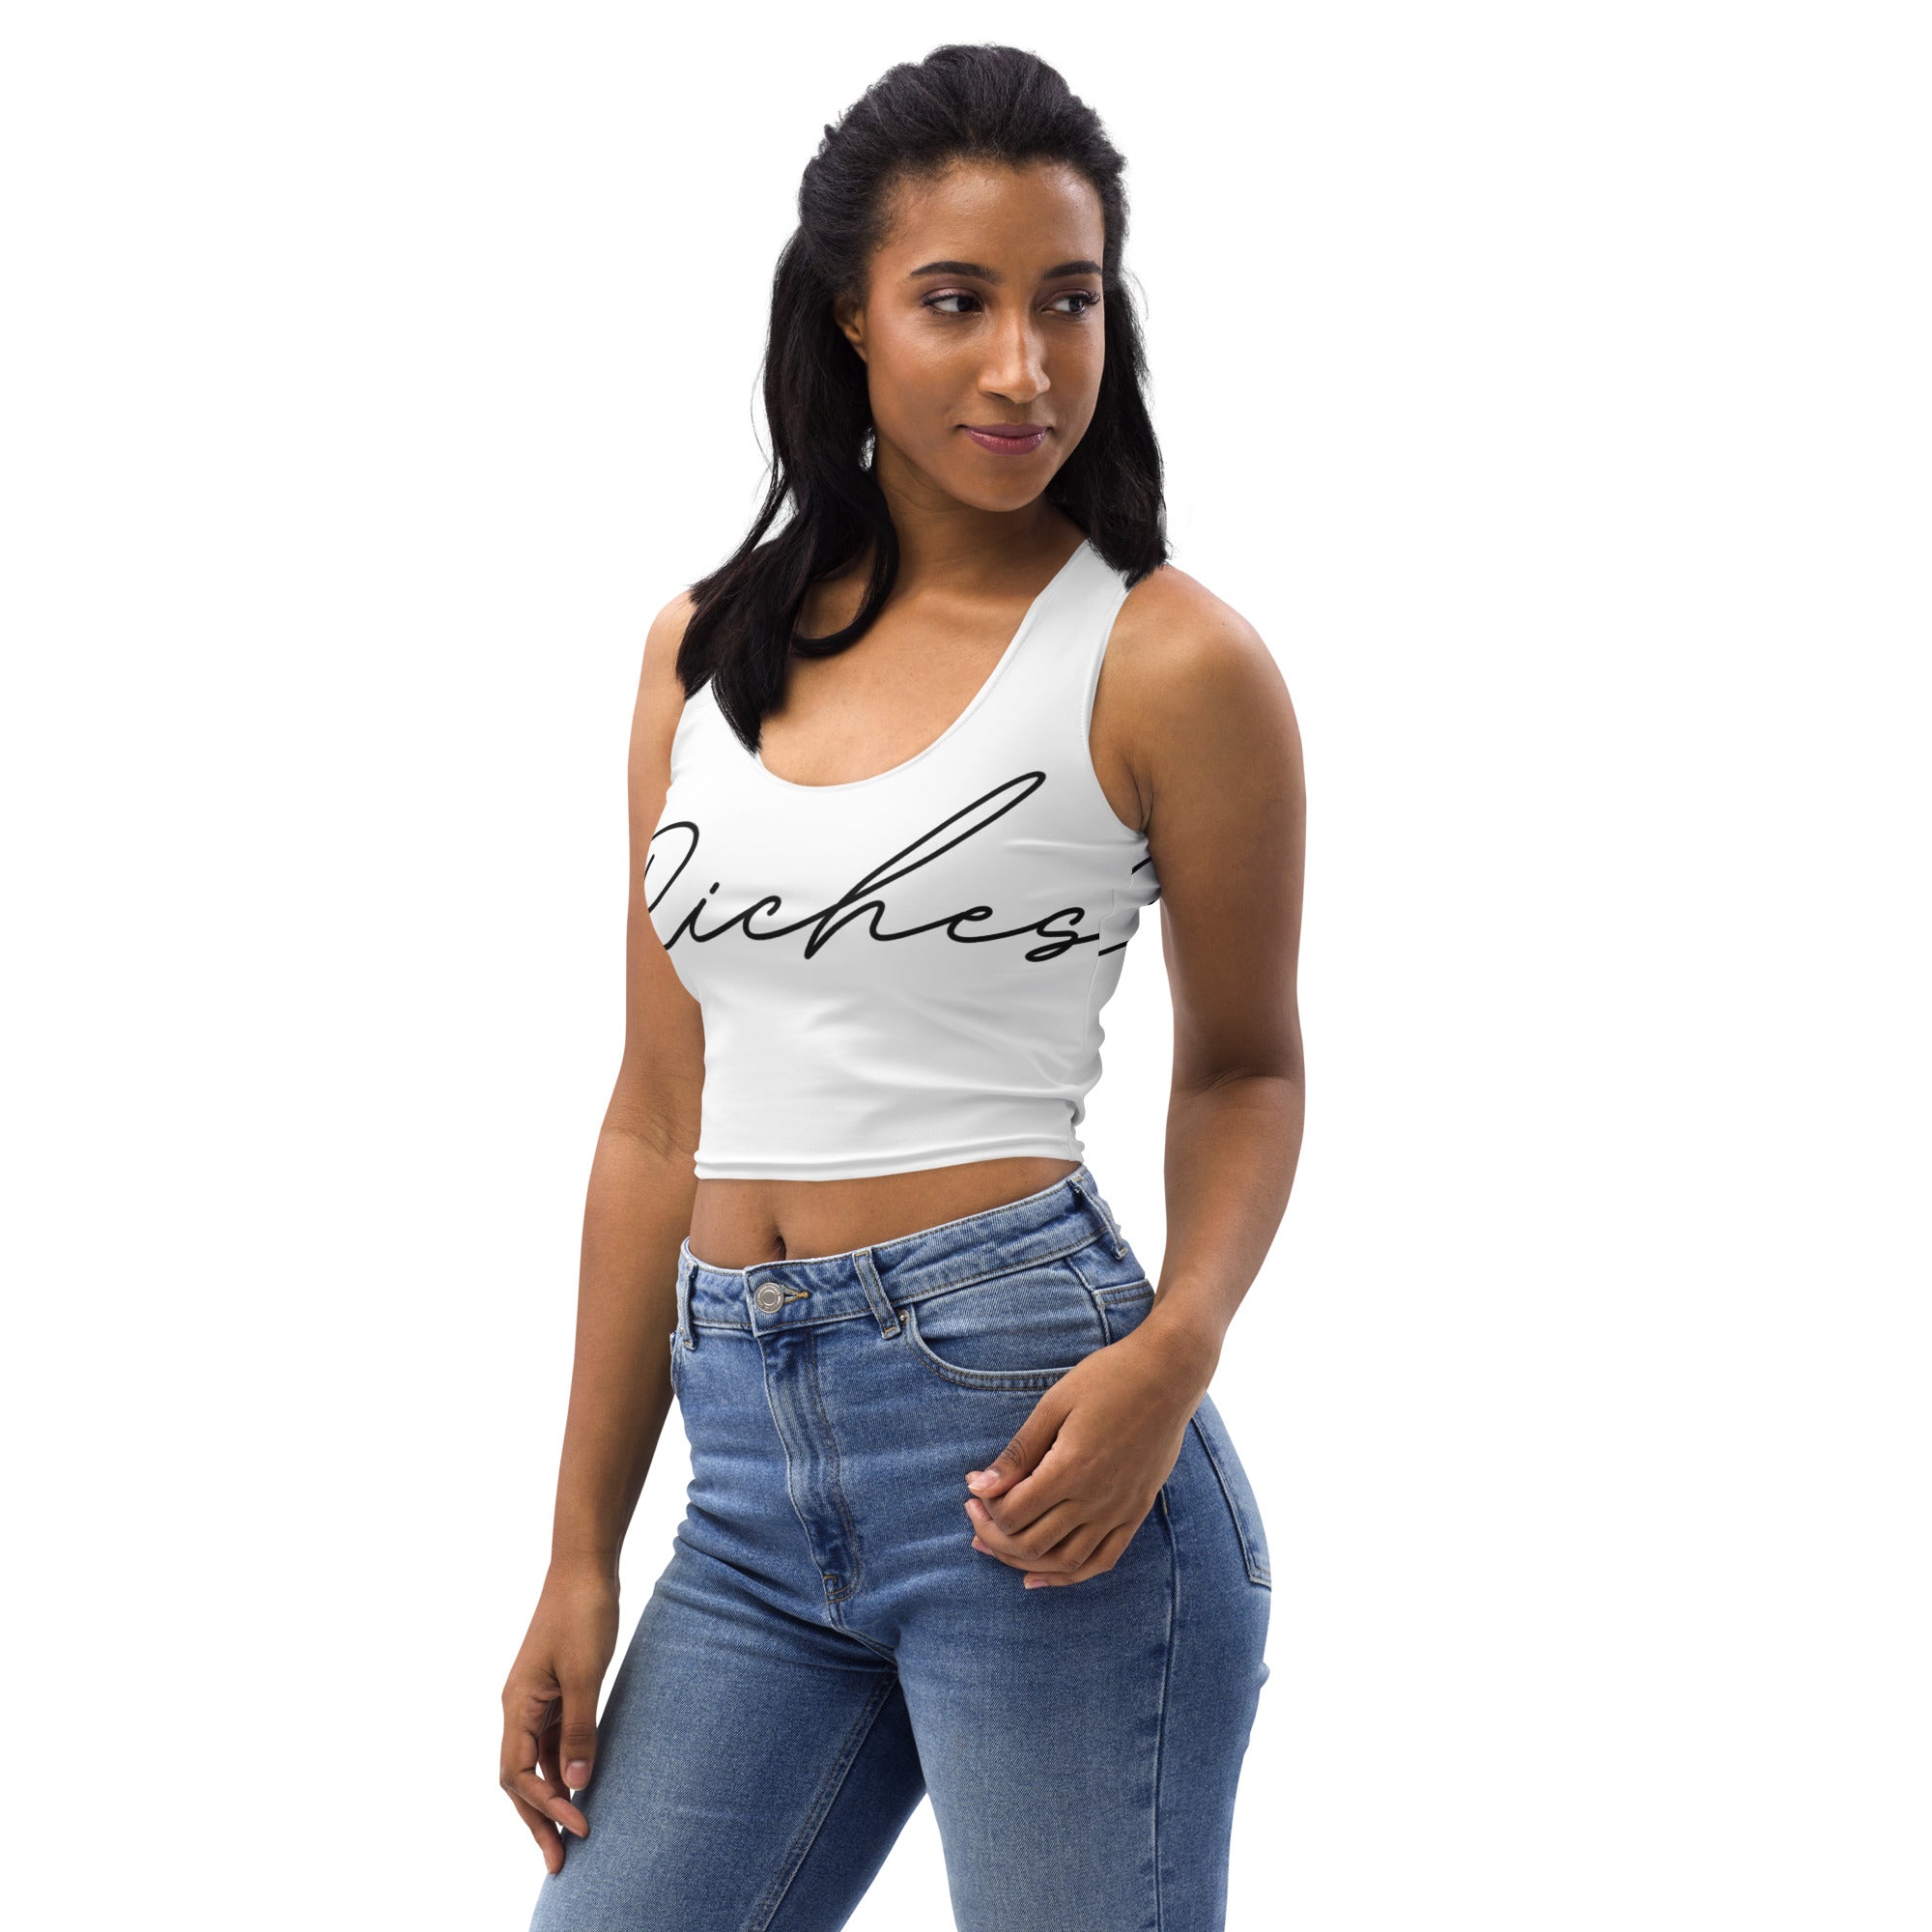 Riches Couture Femme Women Crop Top white 